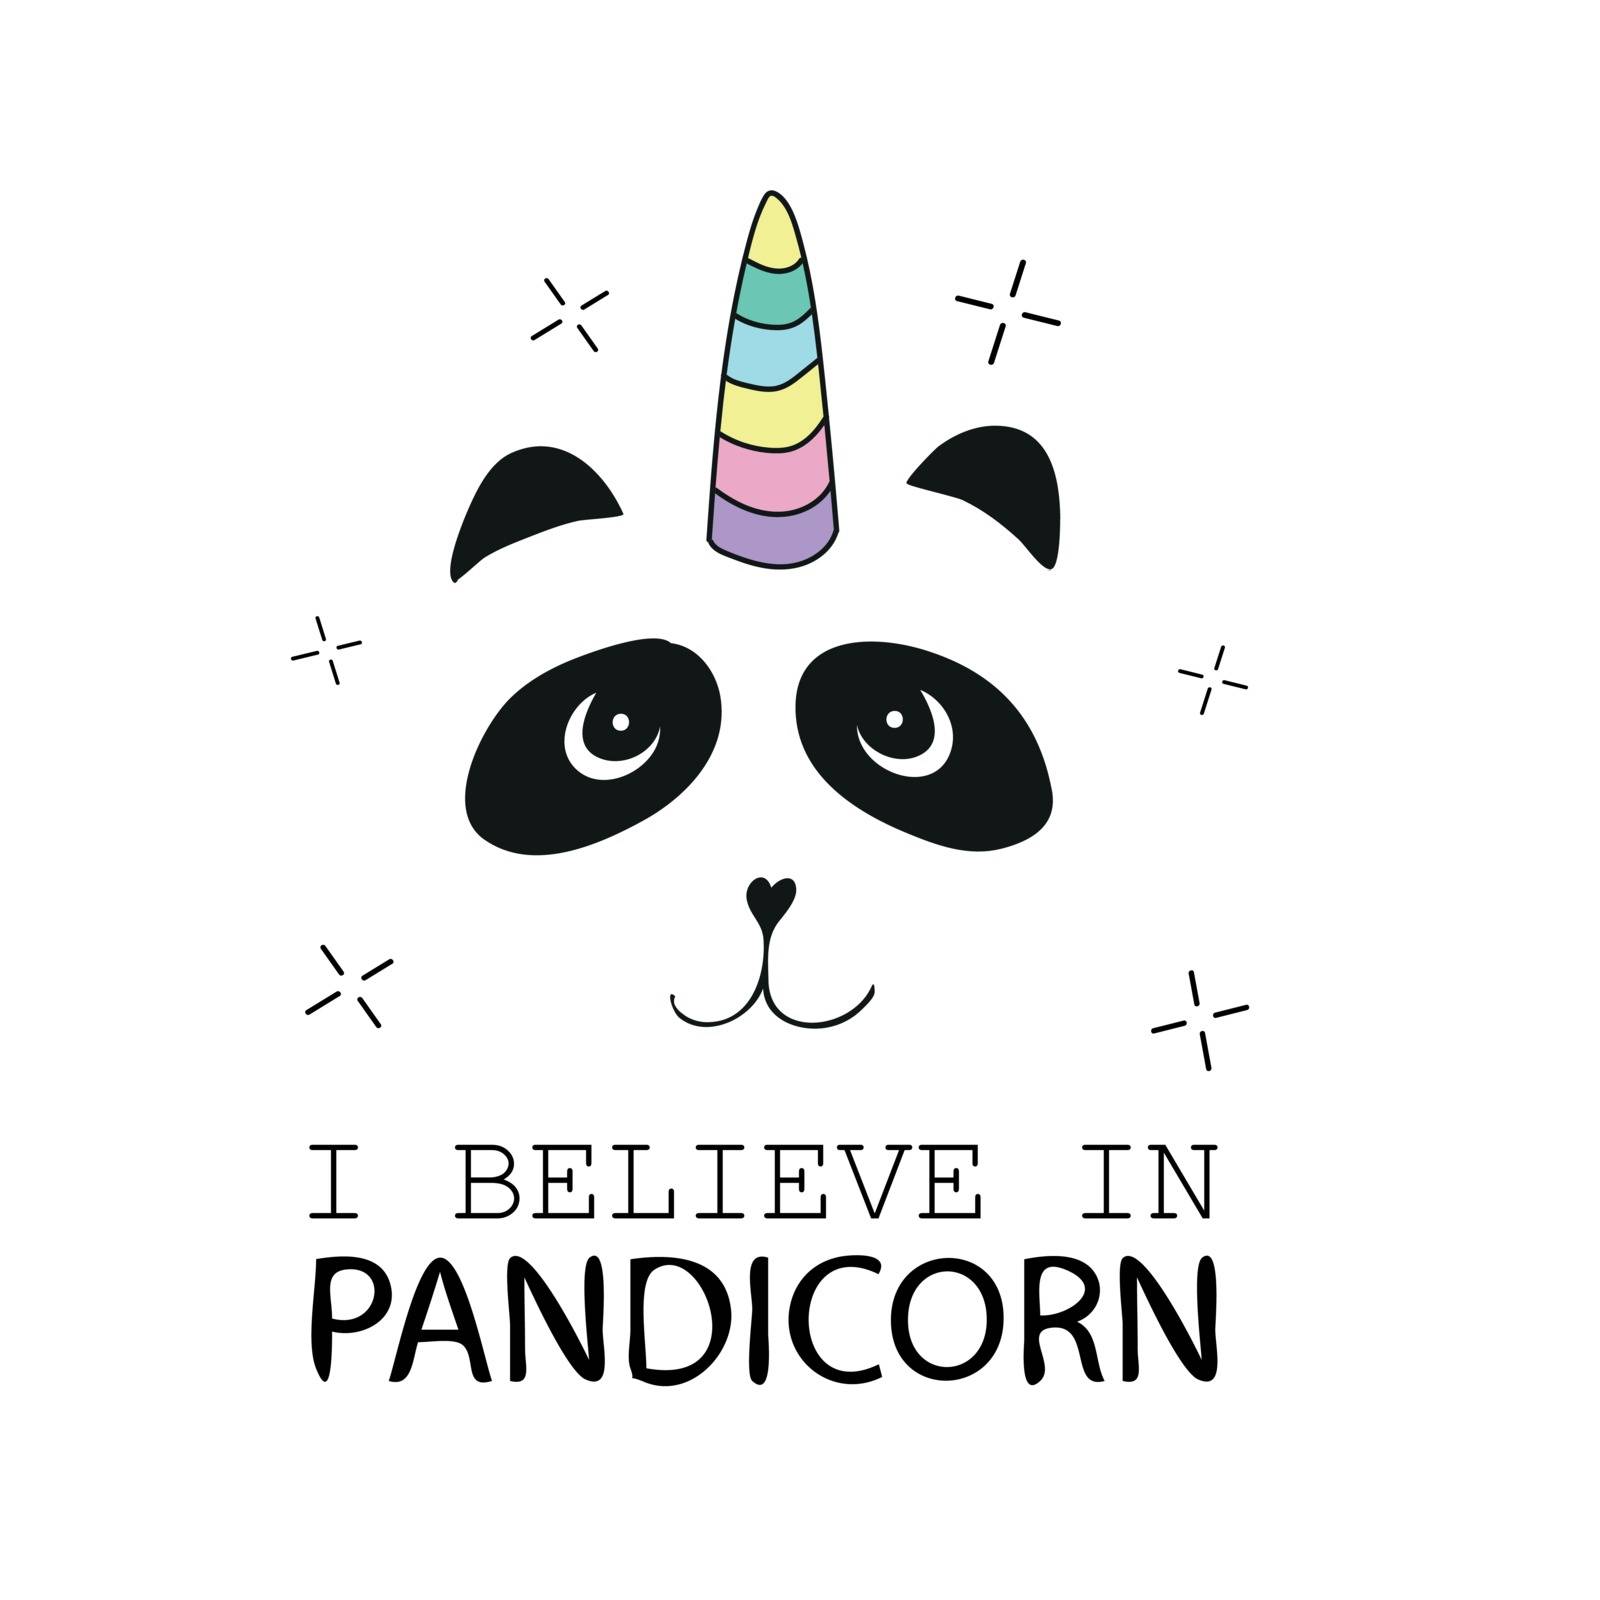 Pandicorn with rainbow mane on white - Cute panda - Vector illustration design for t shirt graphics, prints, posters, cards and other uses